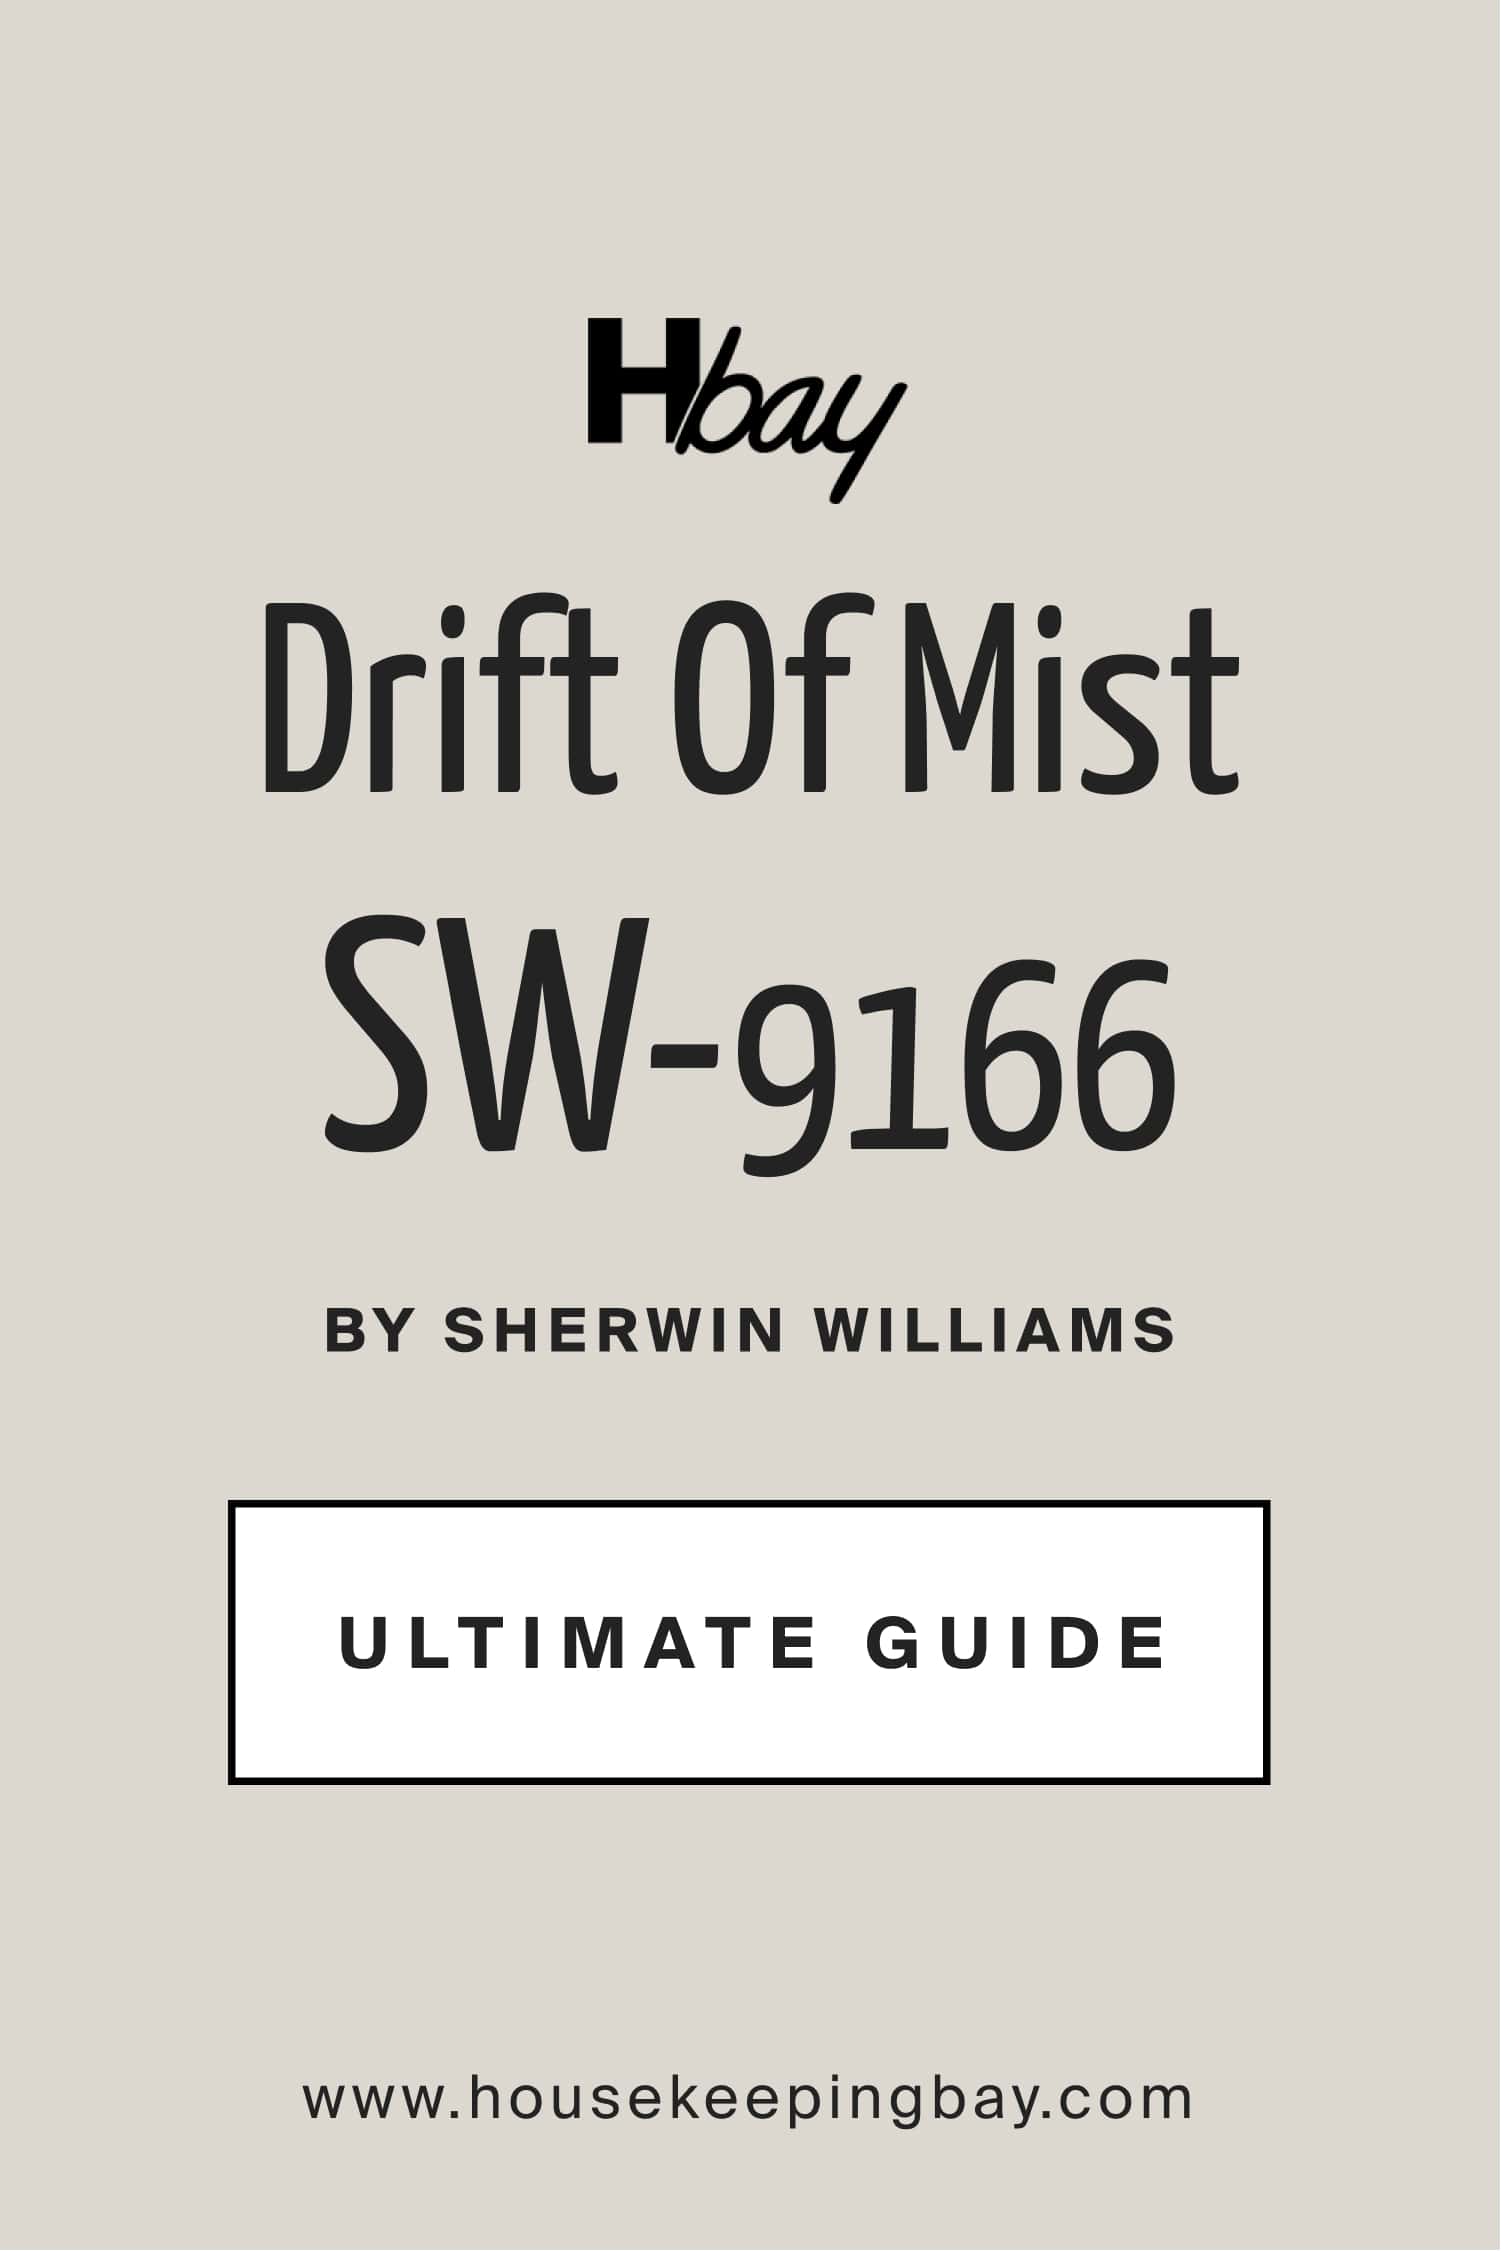 Drift Of Mist SW 9166 by Sherwin Williams Ultimate Guide